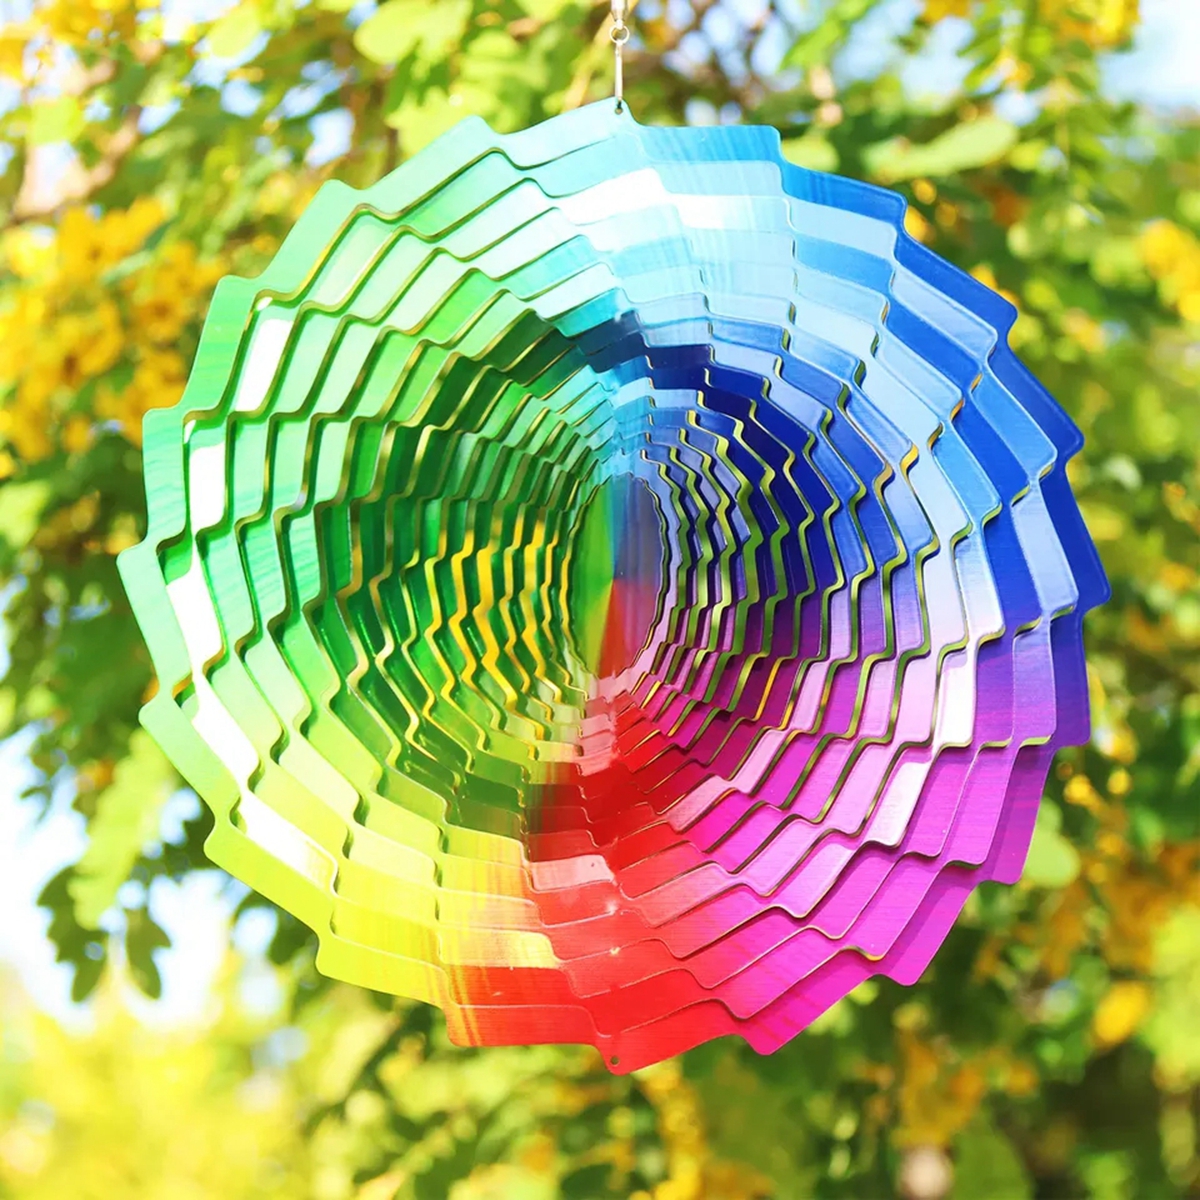 decoration 20cm Cross-border new 3D rotating wind chimes memorial pastoral garden decoration stainless steel colorful tunnel rotating ornaments imake831